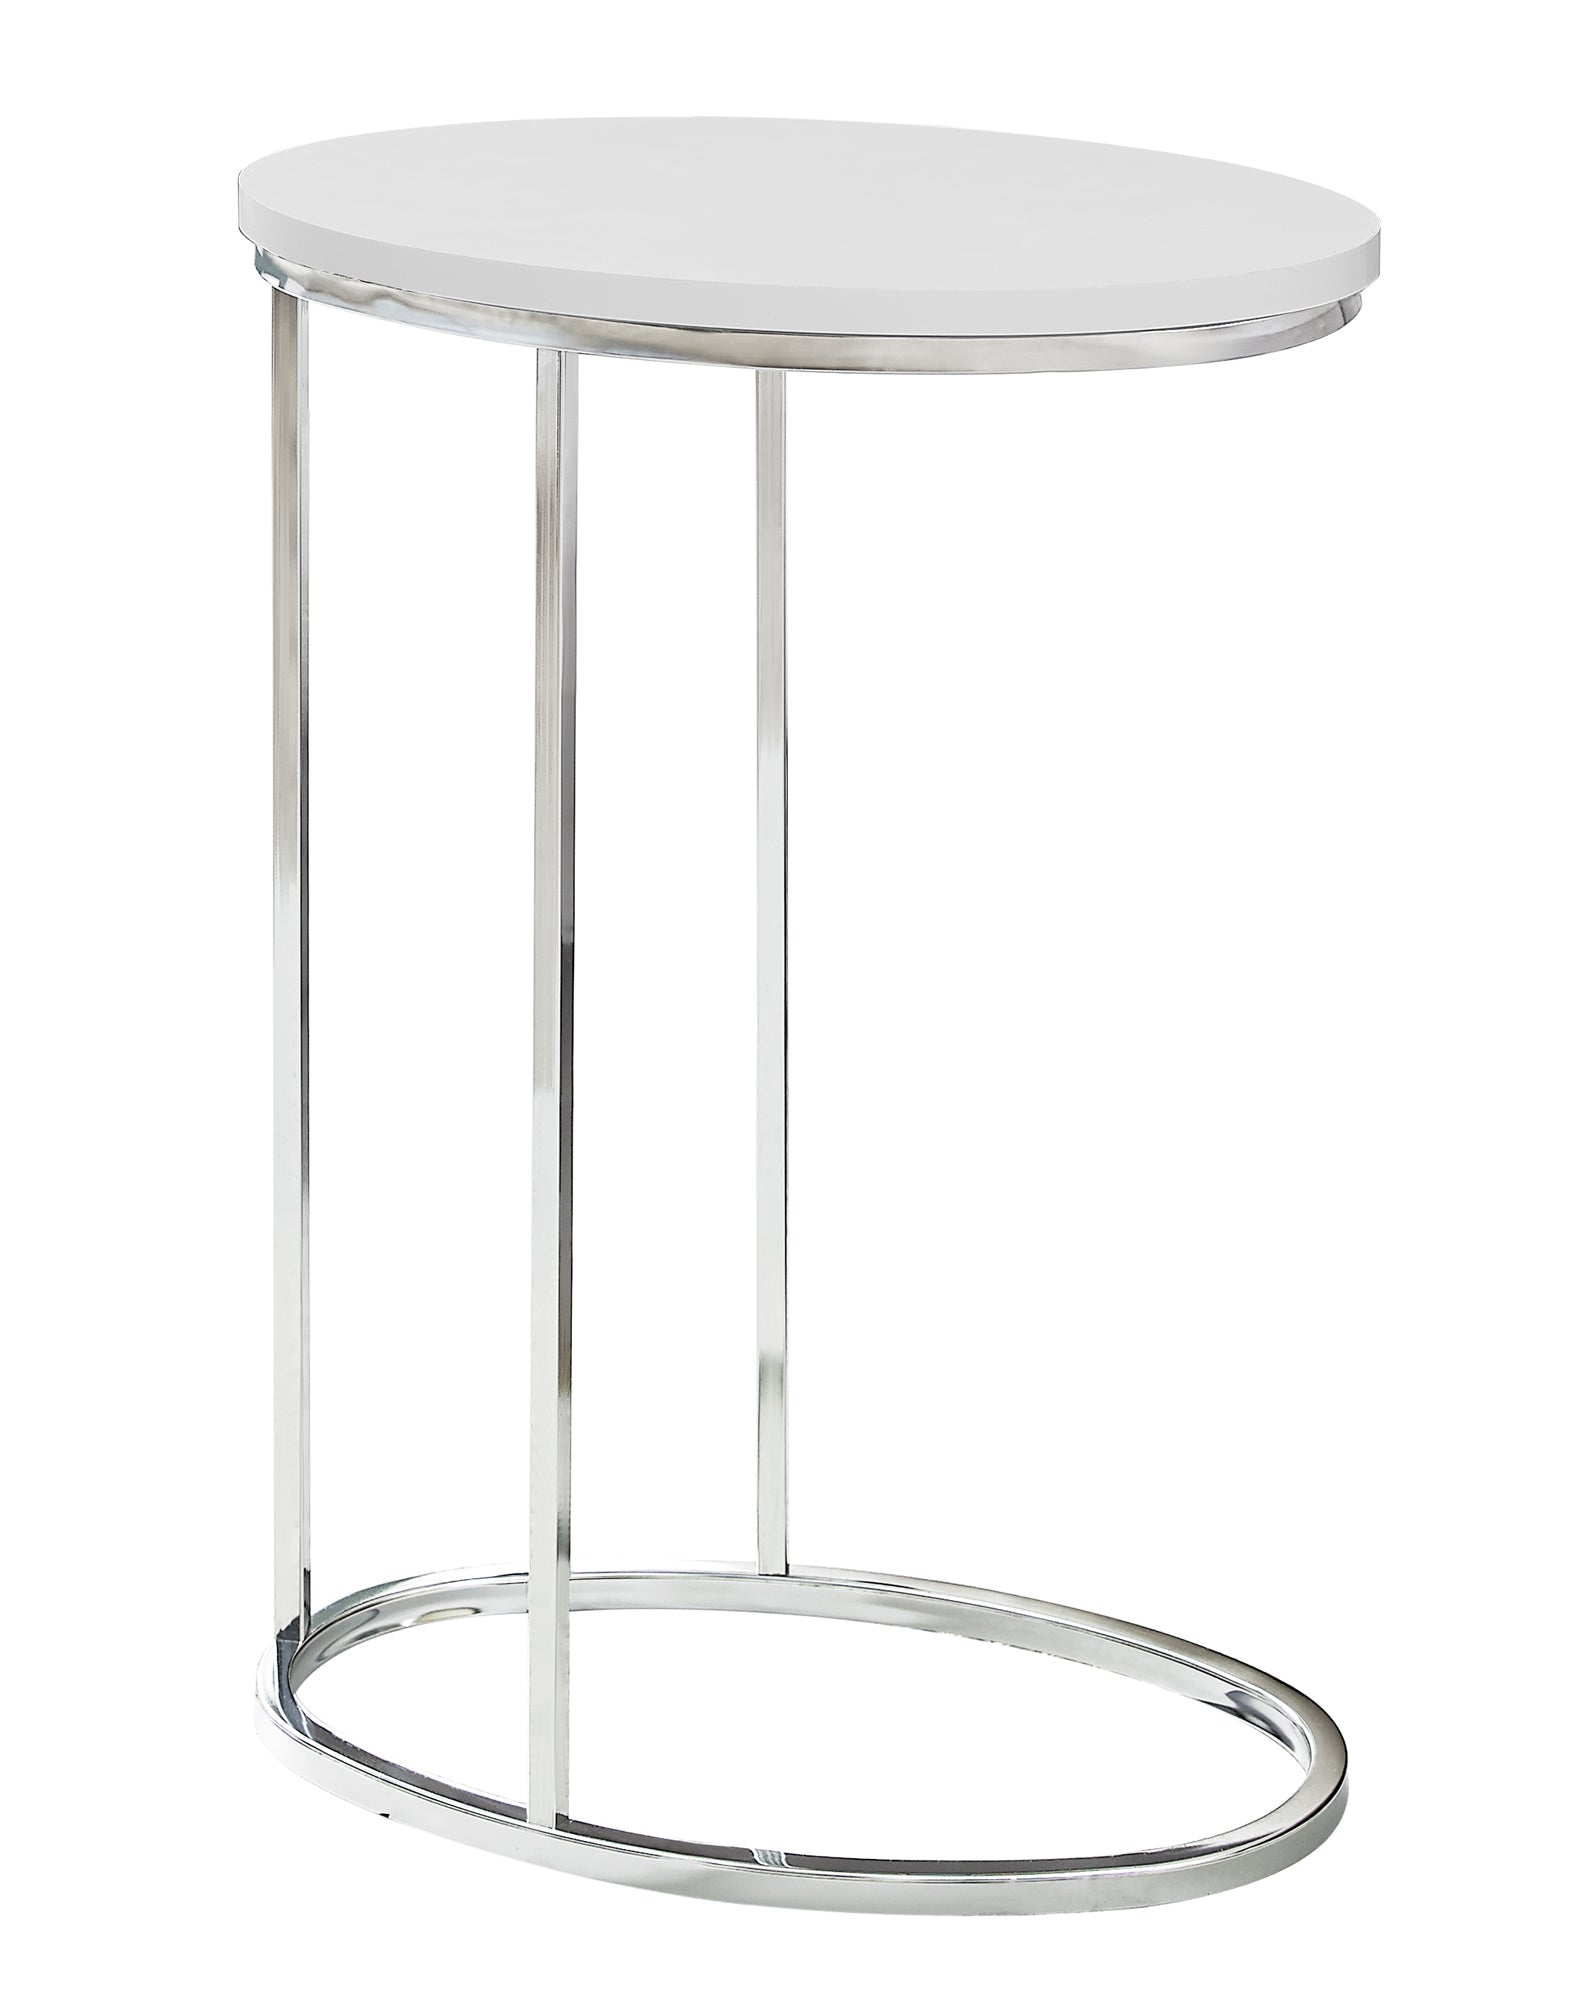 MN-833246    Accent Table, C-Shaped, End, Side, Snack, Living Room, Bedroom, Metal Legs, Laminate, Glossy White, Chrome, Contemporary, Modern